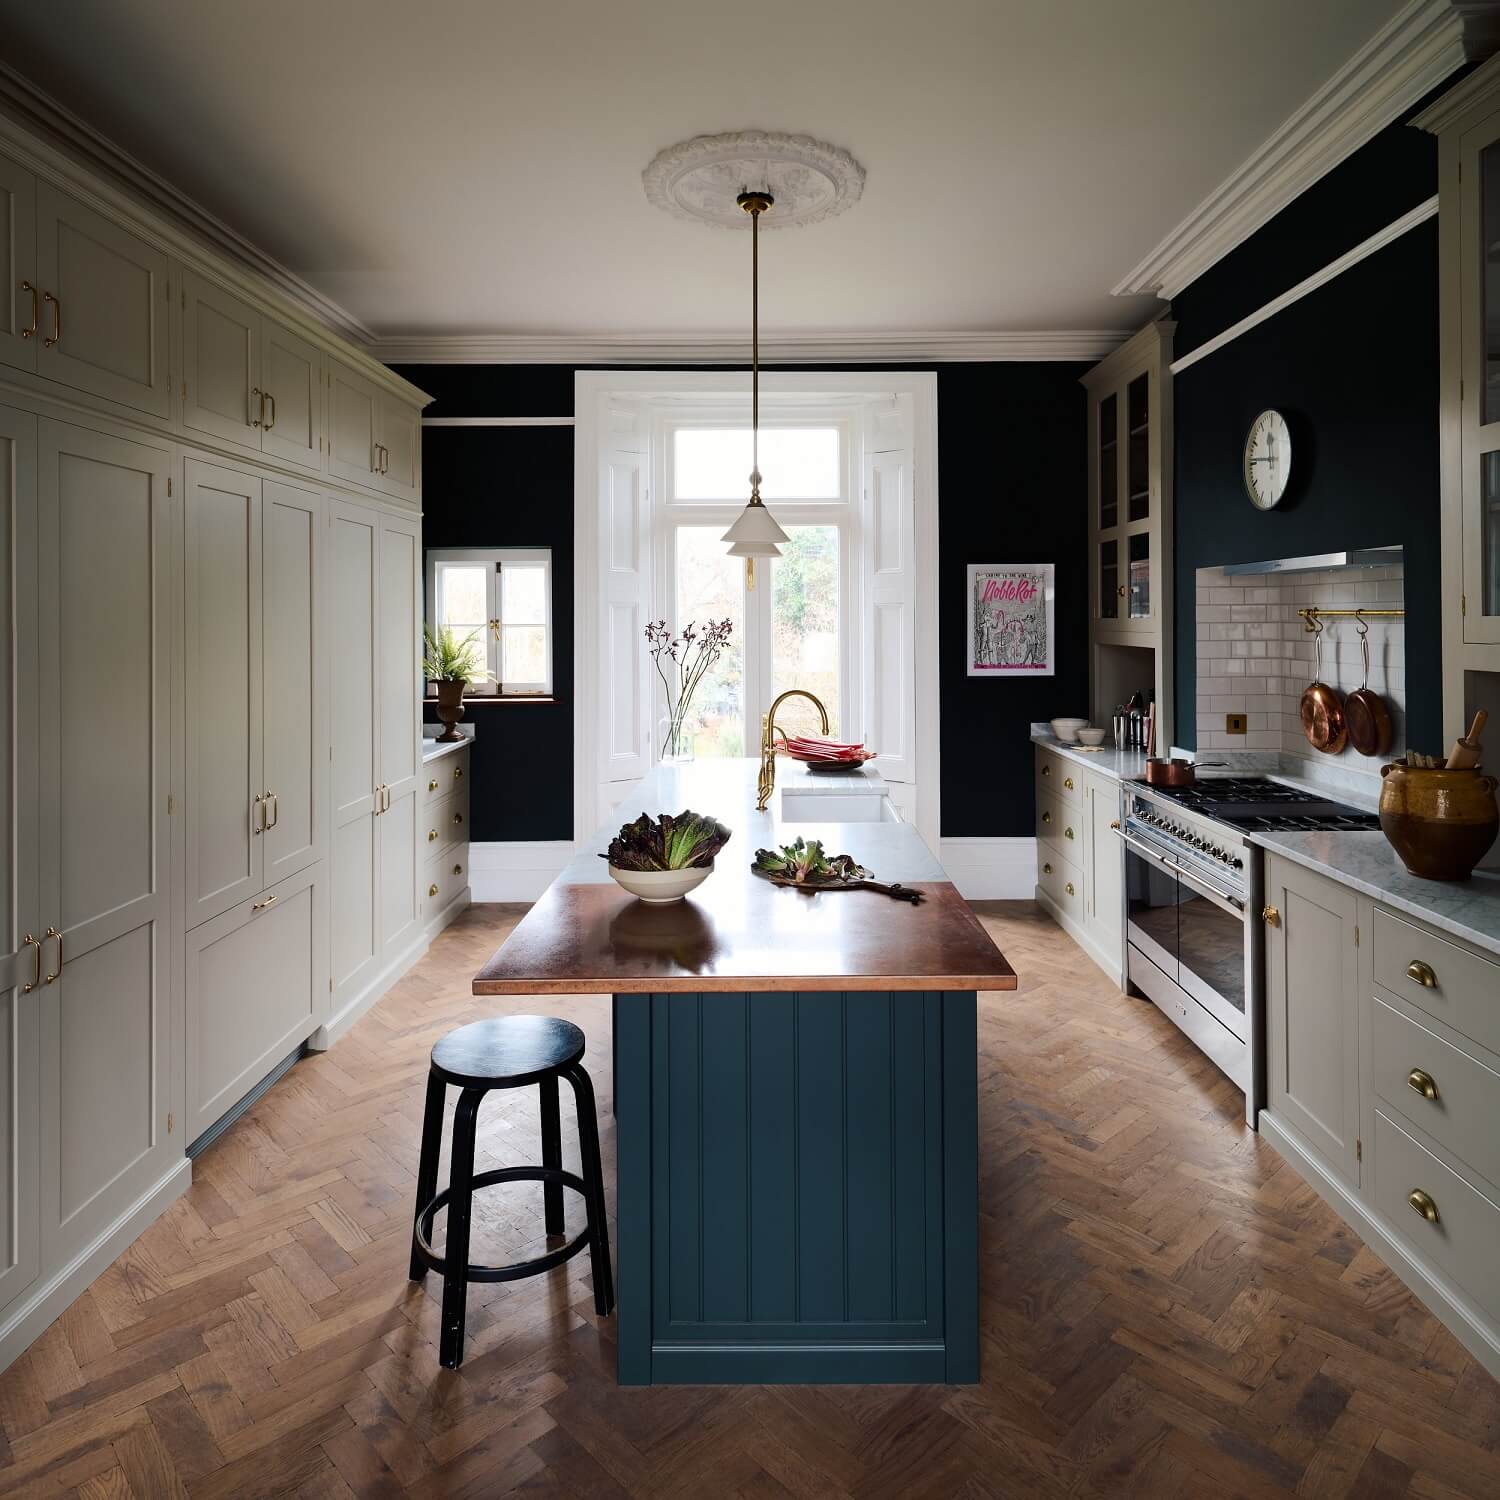 A Green and Greige deVOL Kitchen in a Victorian Townhouse